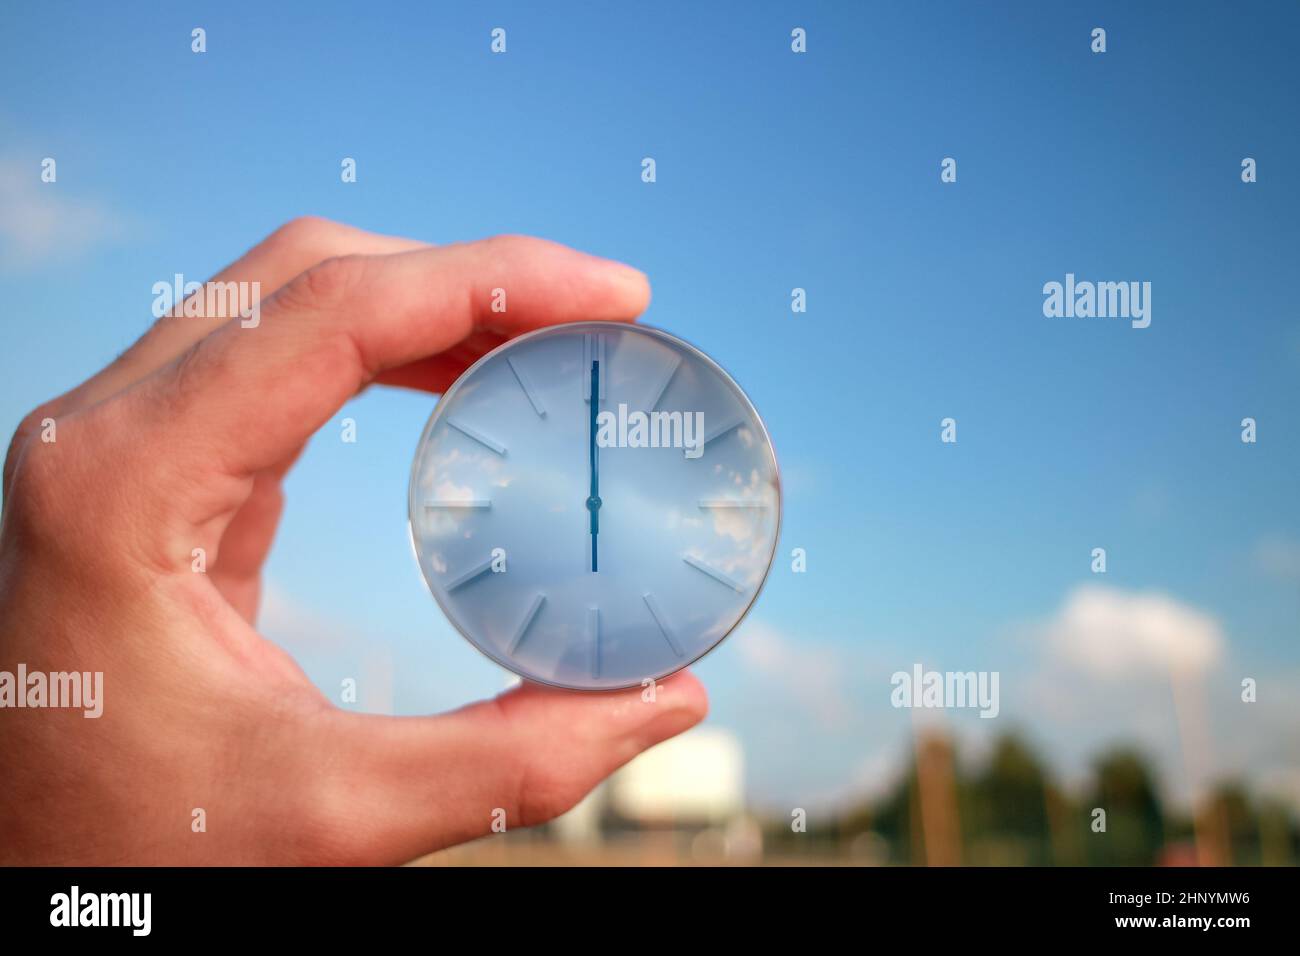 The dial of a watch in a hand against a background of blue sky. Twelve o'clock in the afternoon on the dial of the clock. Stock Photo